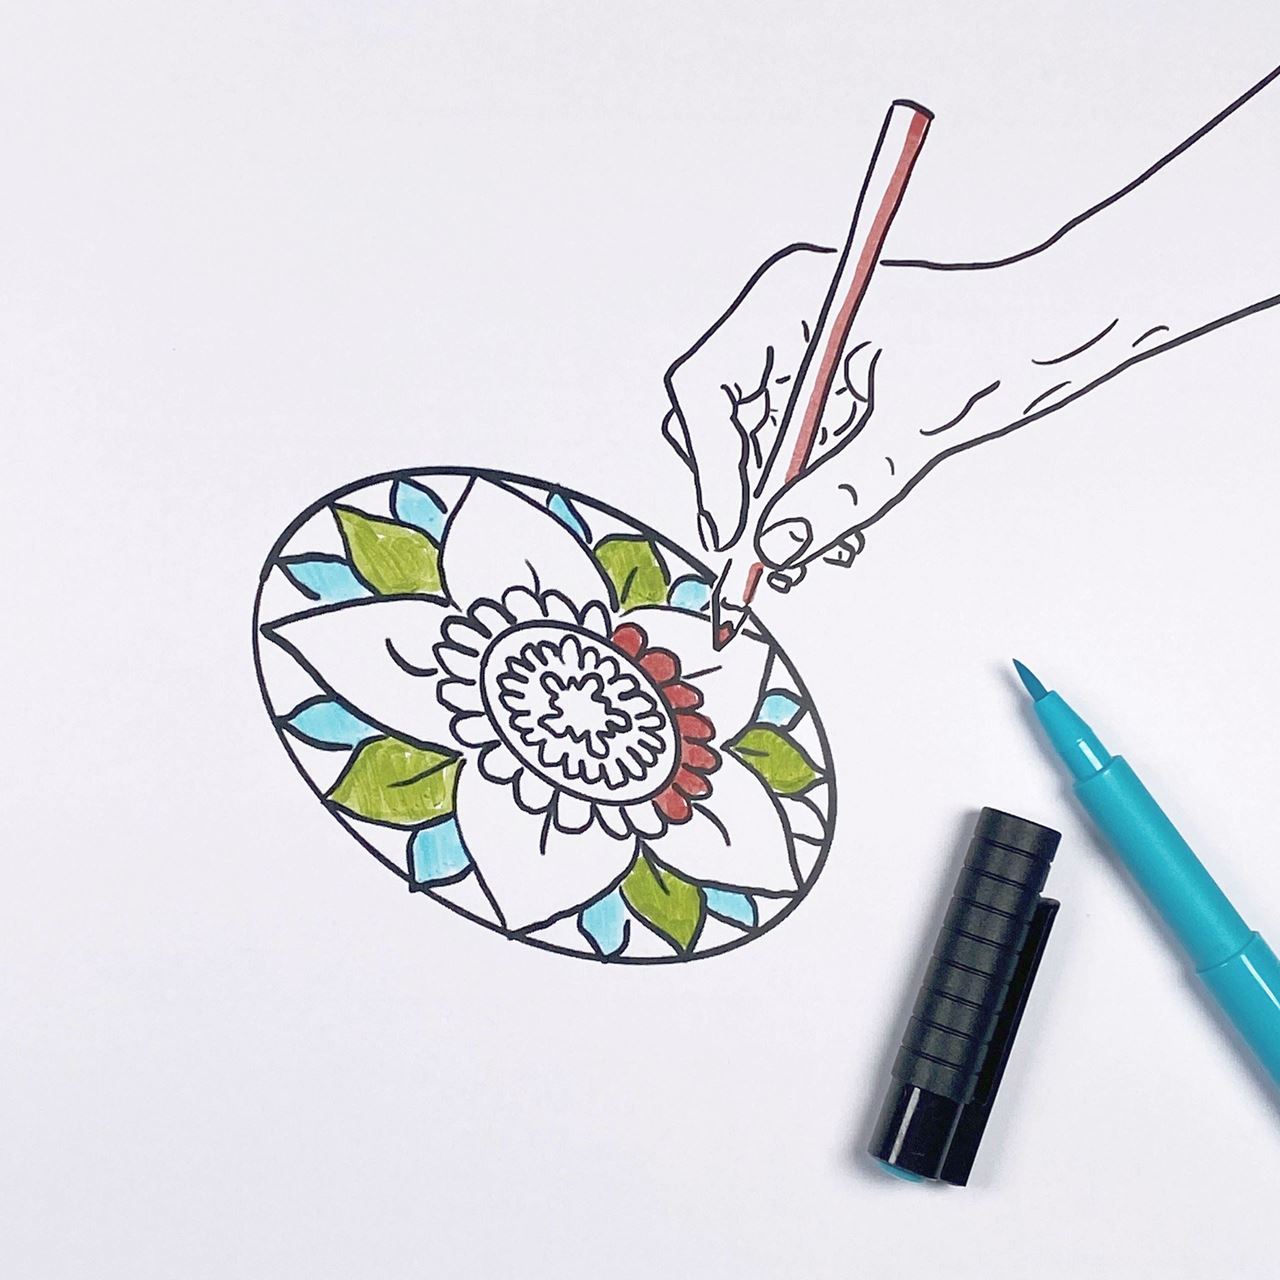 sketch of a mandala with a hand holding a pen